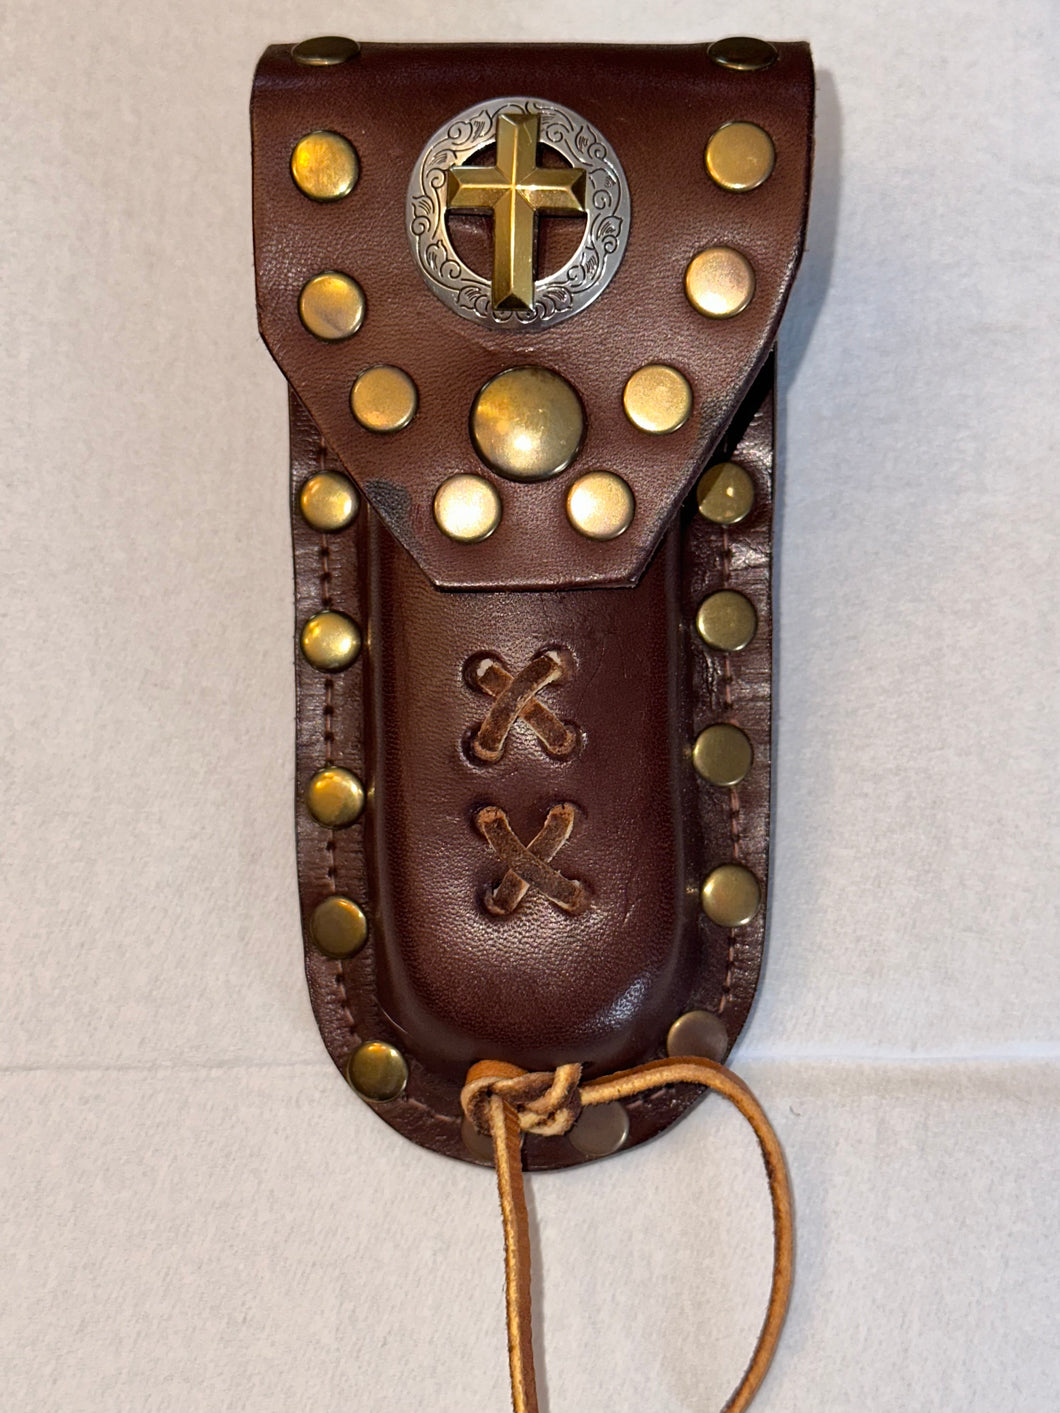 Buck 110 Leather Knife Case - Gold Cross with Silver Field (Medium Brown)